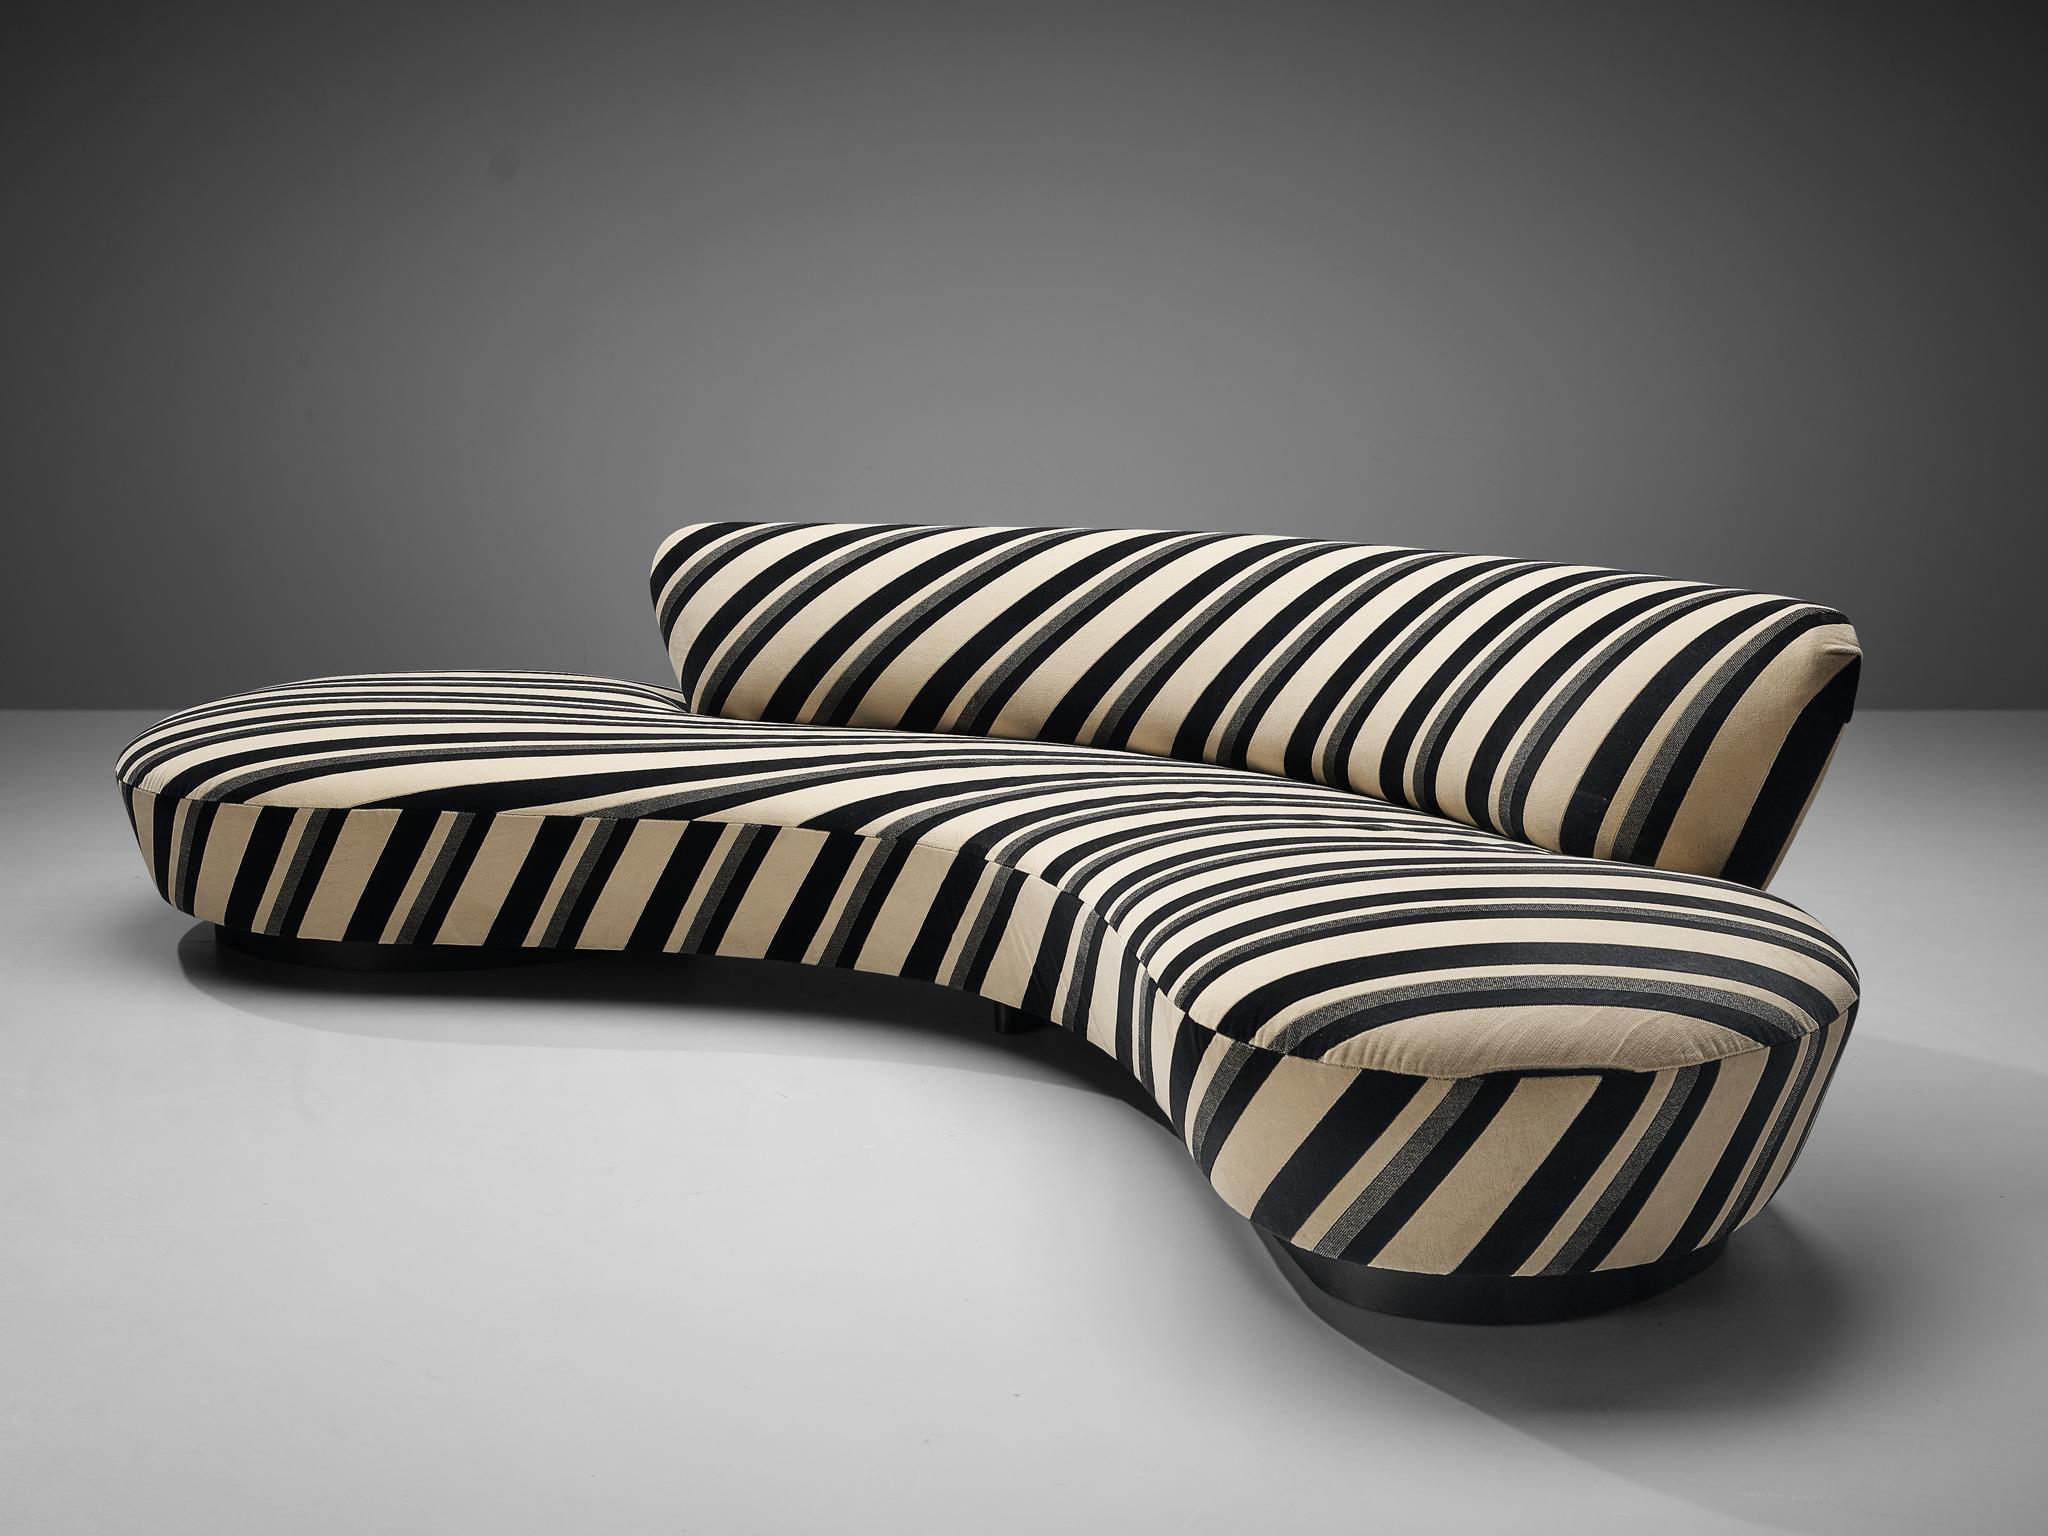 Vladimir Kagan, sofa model ‘Serpentine’, striped fabric upholstery, United States, design 1950s

Beautiful Vladimir Kagan sofa in striped upholstery that embraces the sensuous curves. Due to the organic shape and the absence of strict angles, the